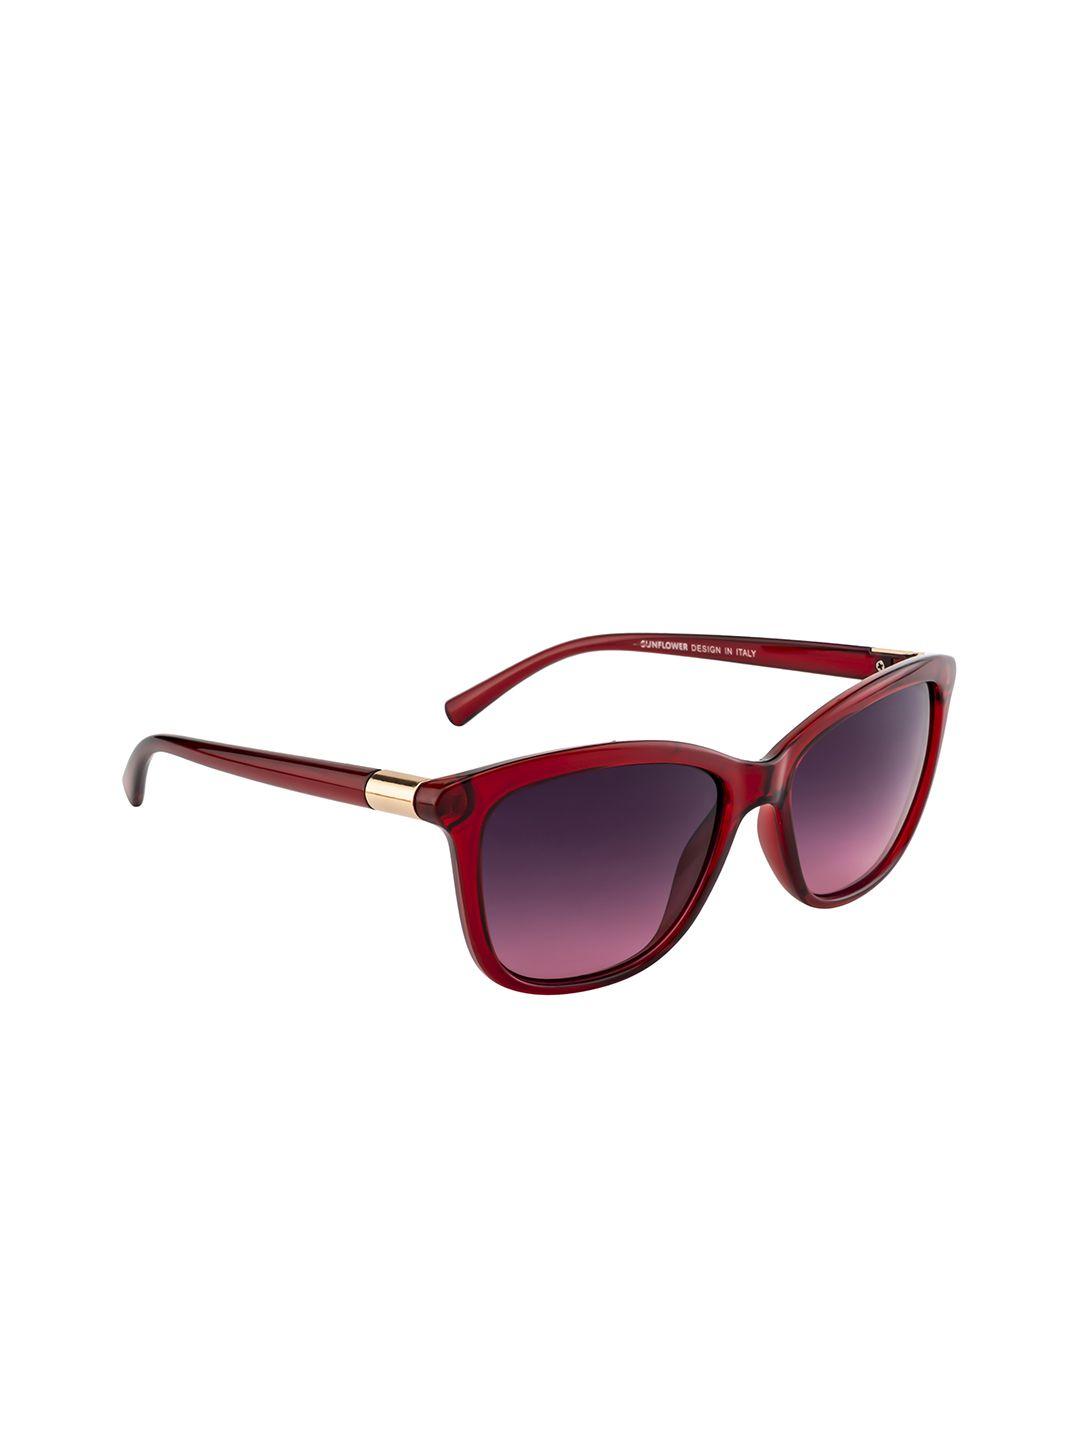 dressberry women cateye sunglasses with uv protected lens db-p8559-c7